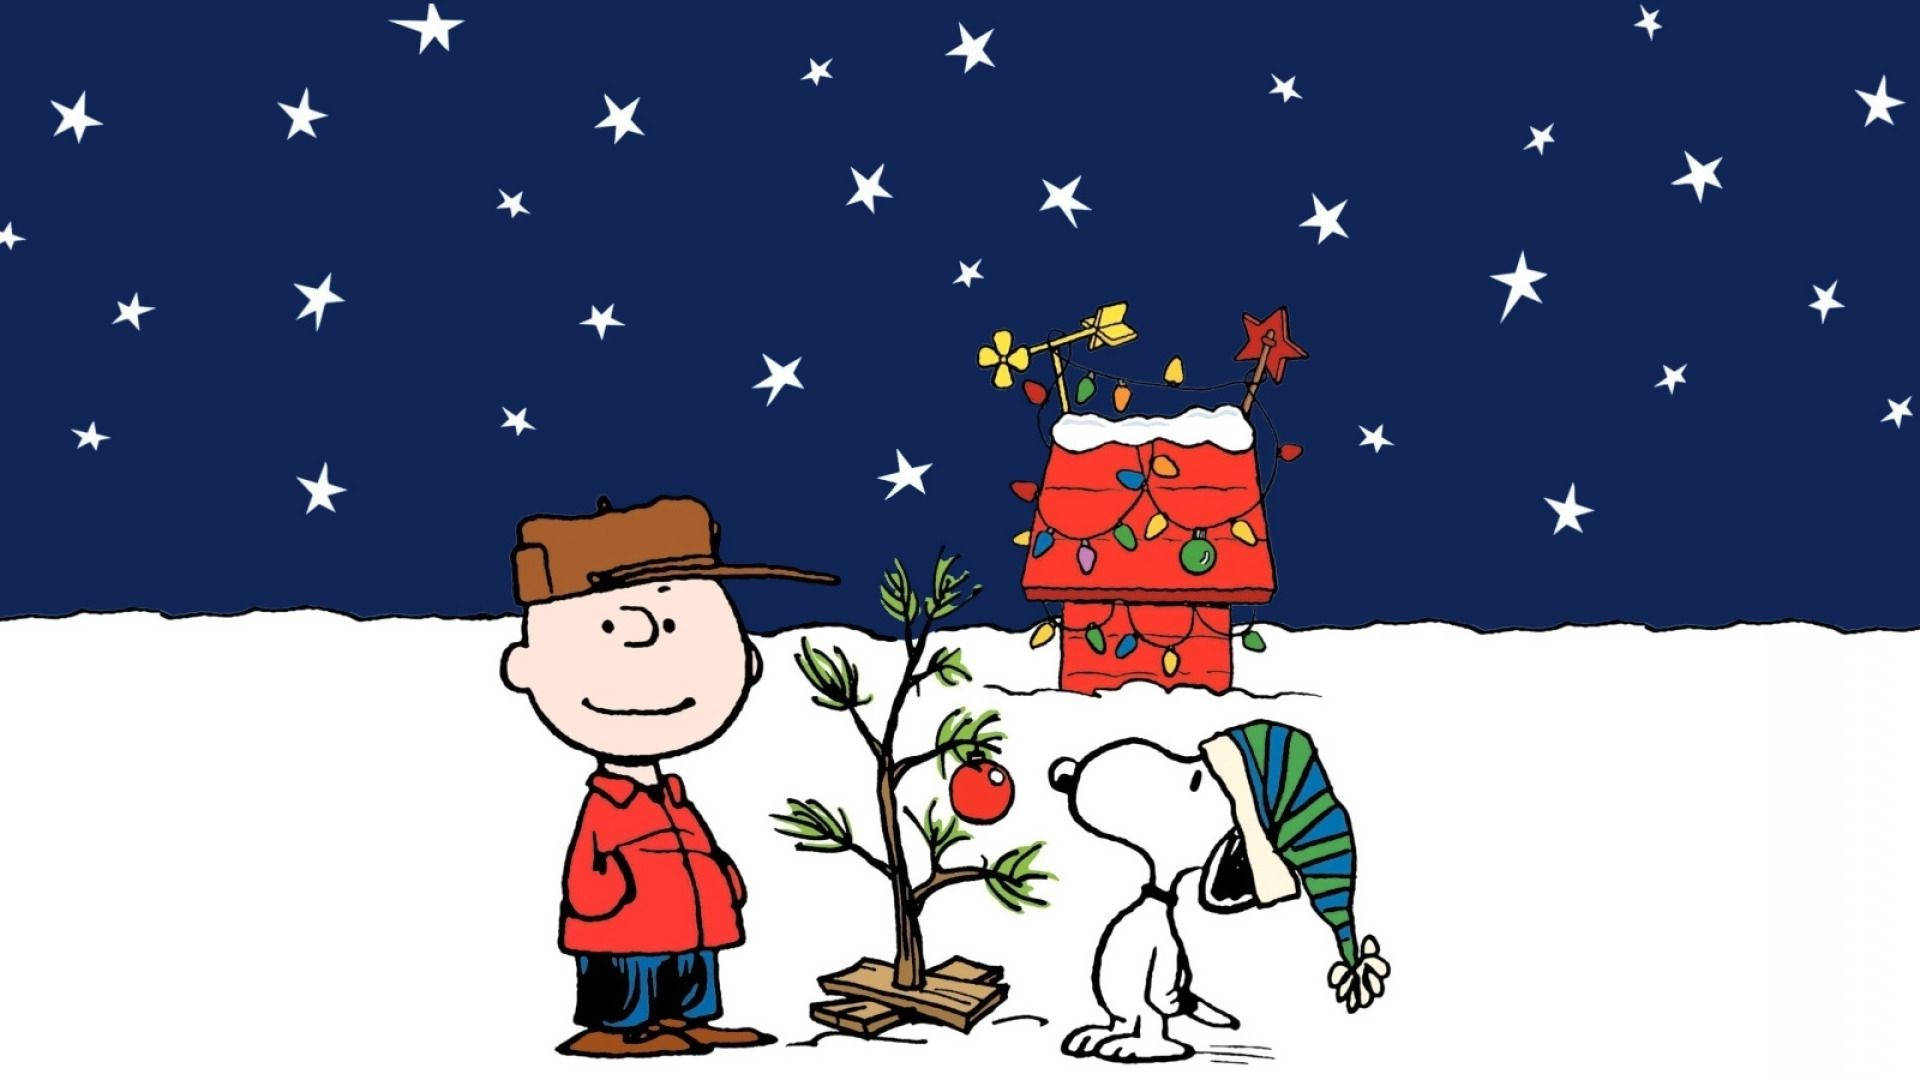 Charlie Brown And Snoopy With A Christmas Tree Wallpaper